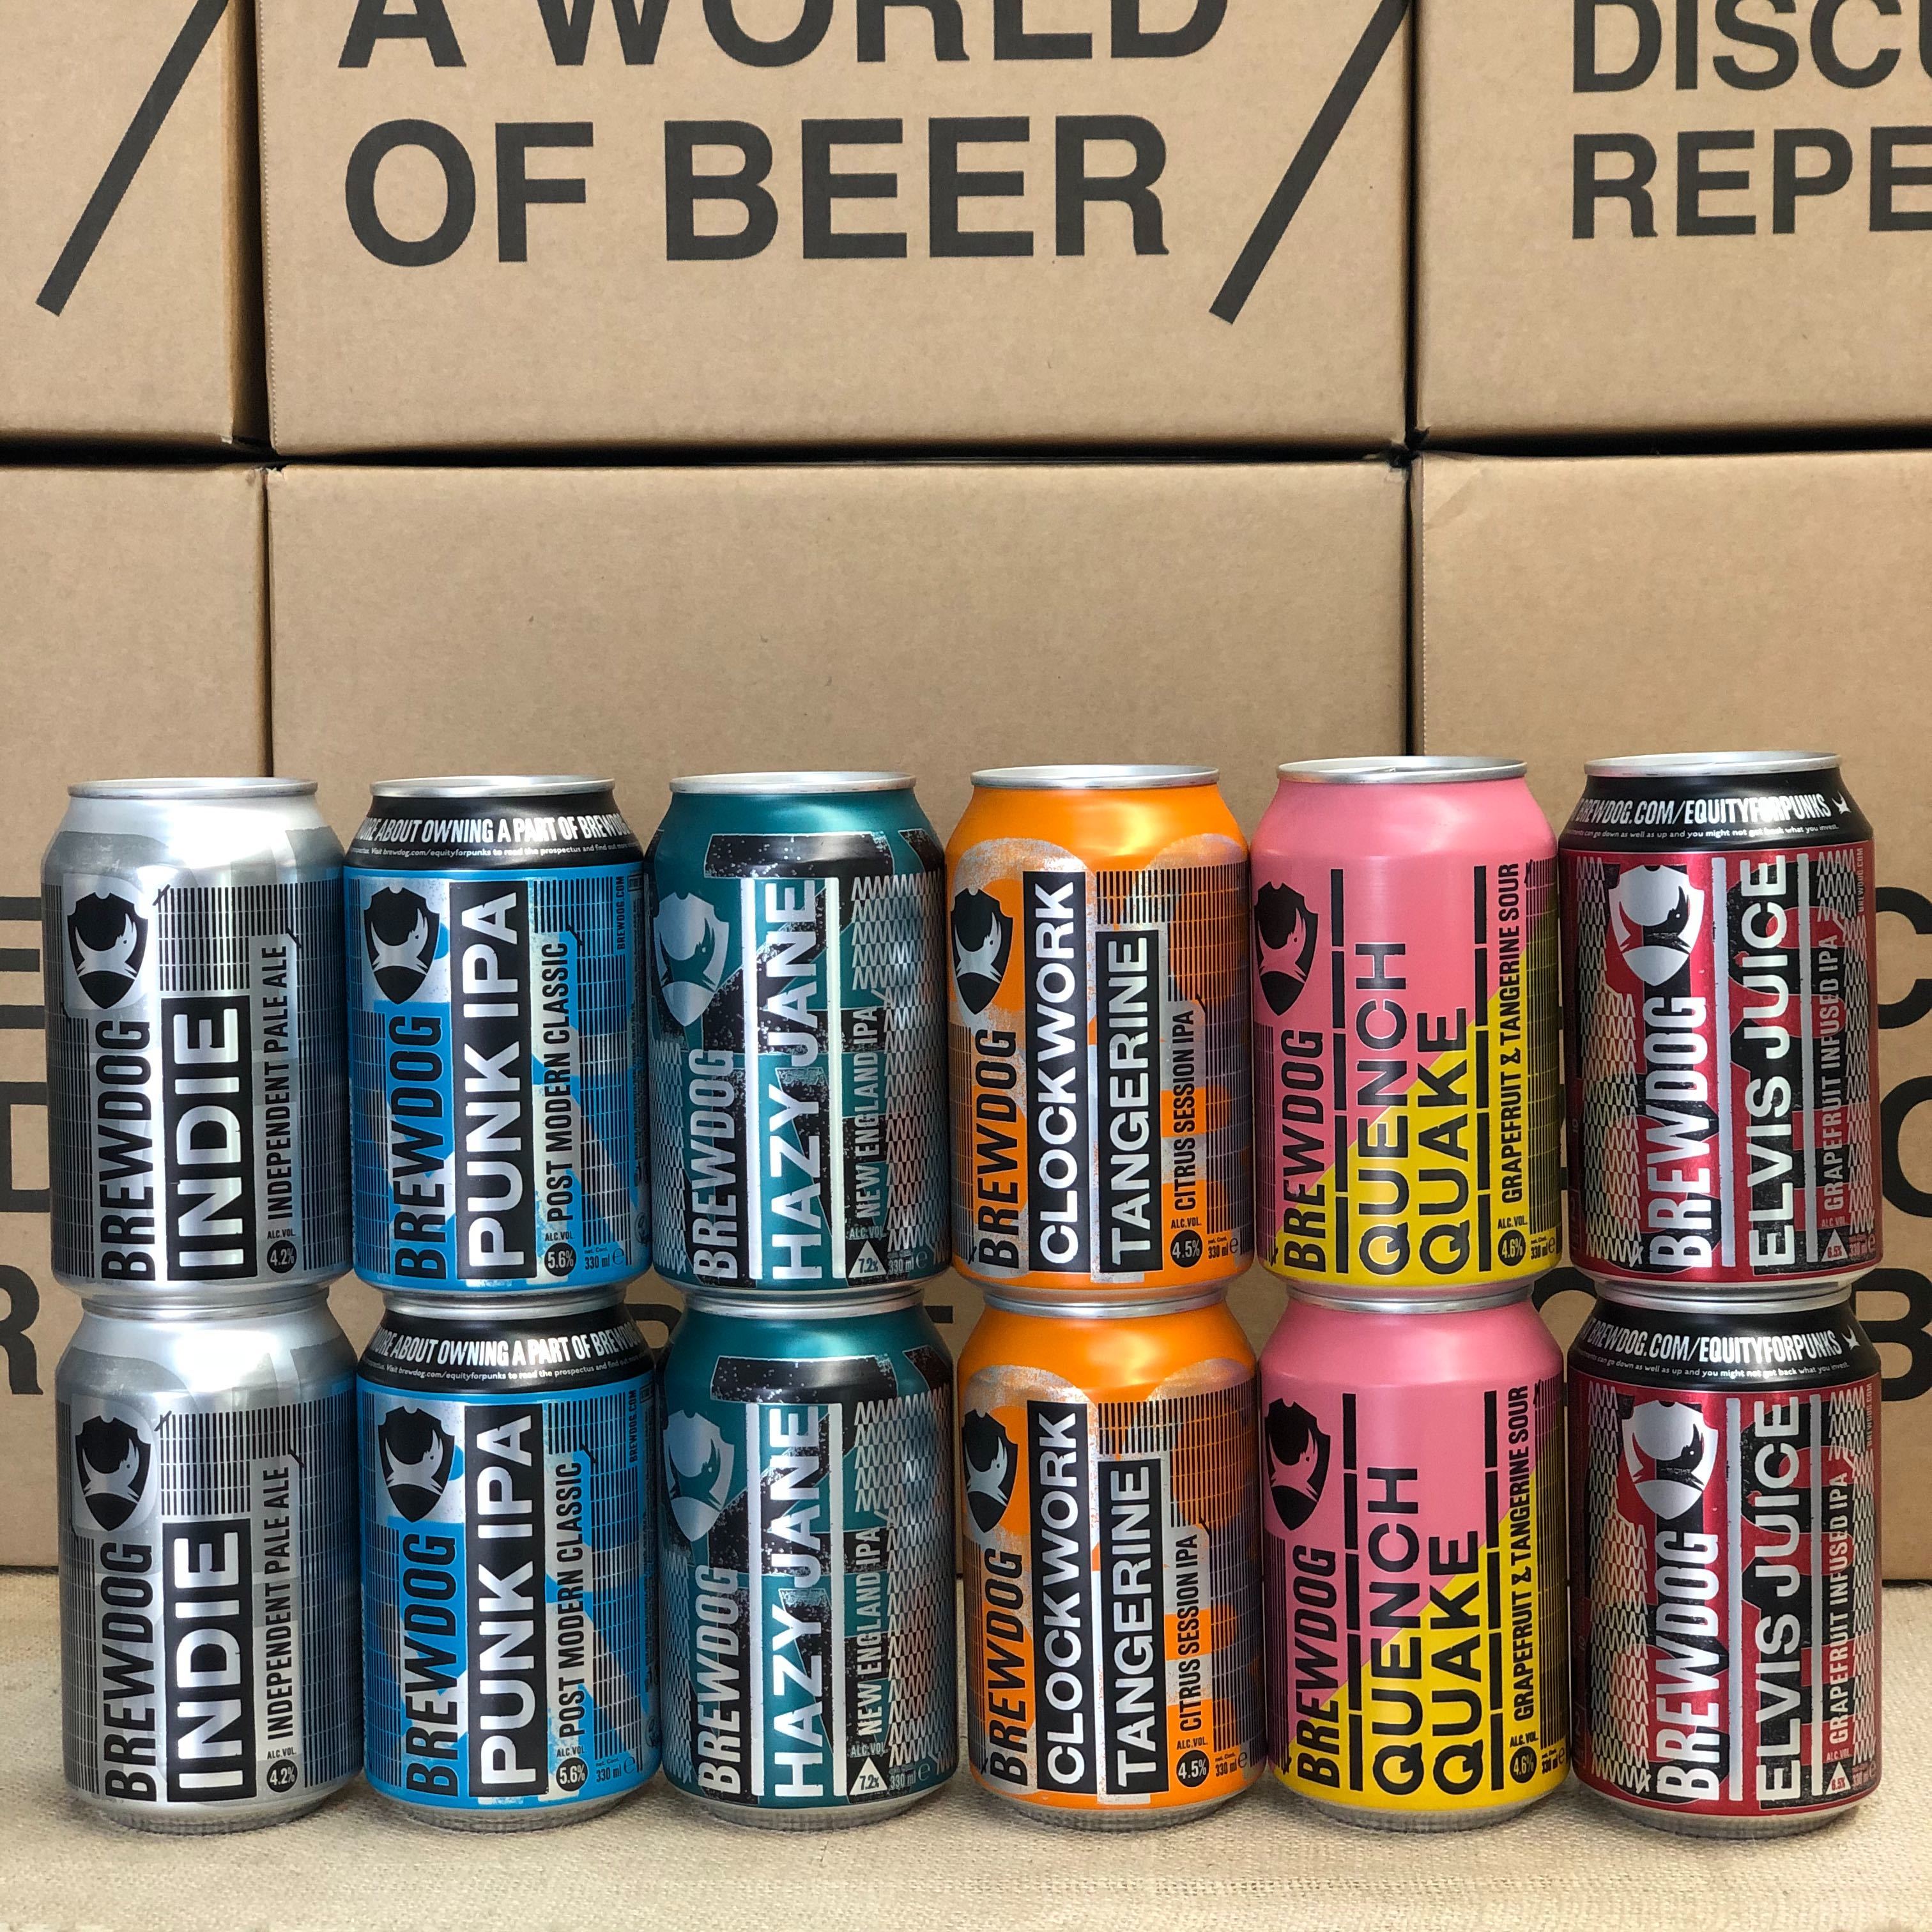 This Is: BrewDog - 12 Beer Mixed Case